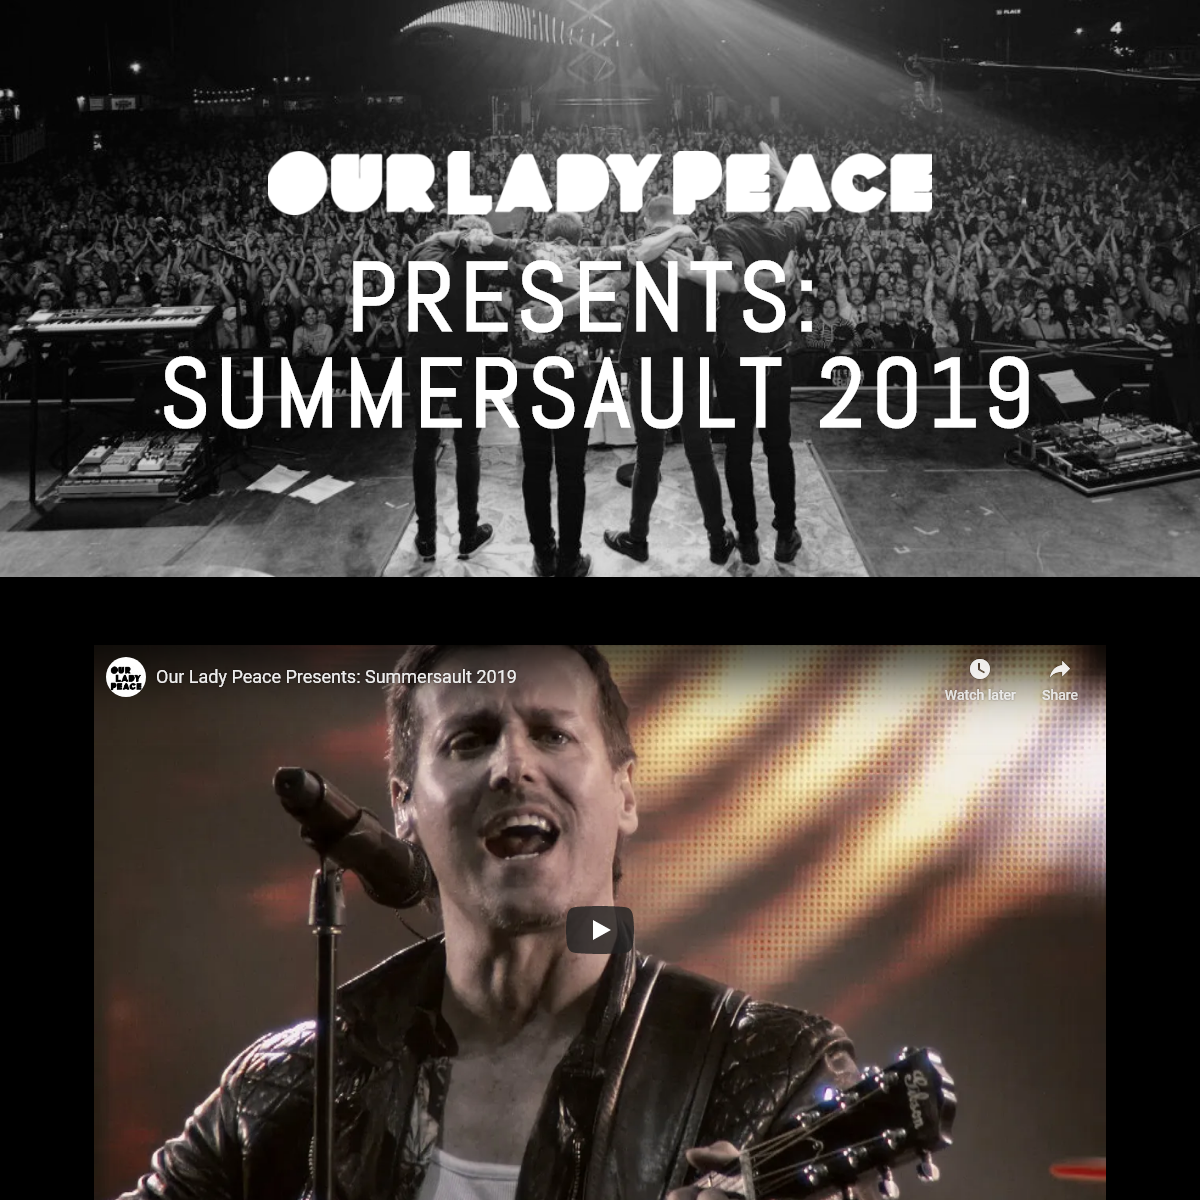 A complete backup of ourladypeace.com